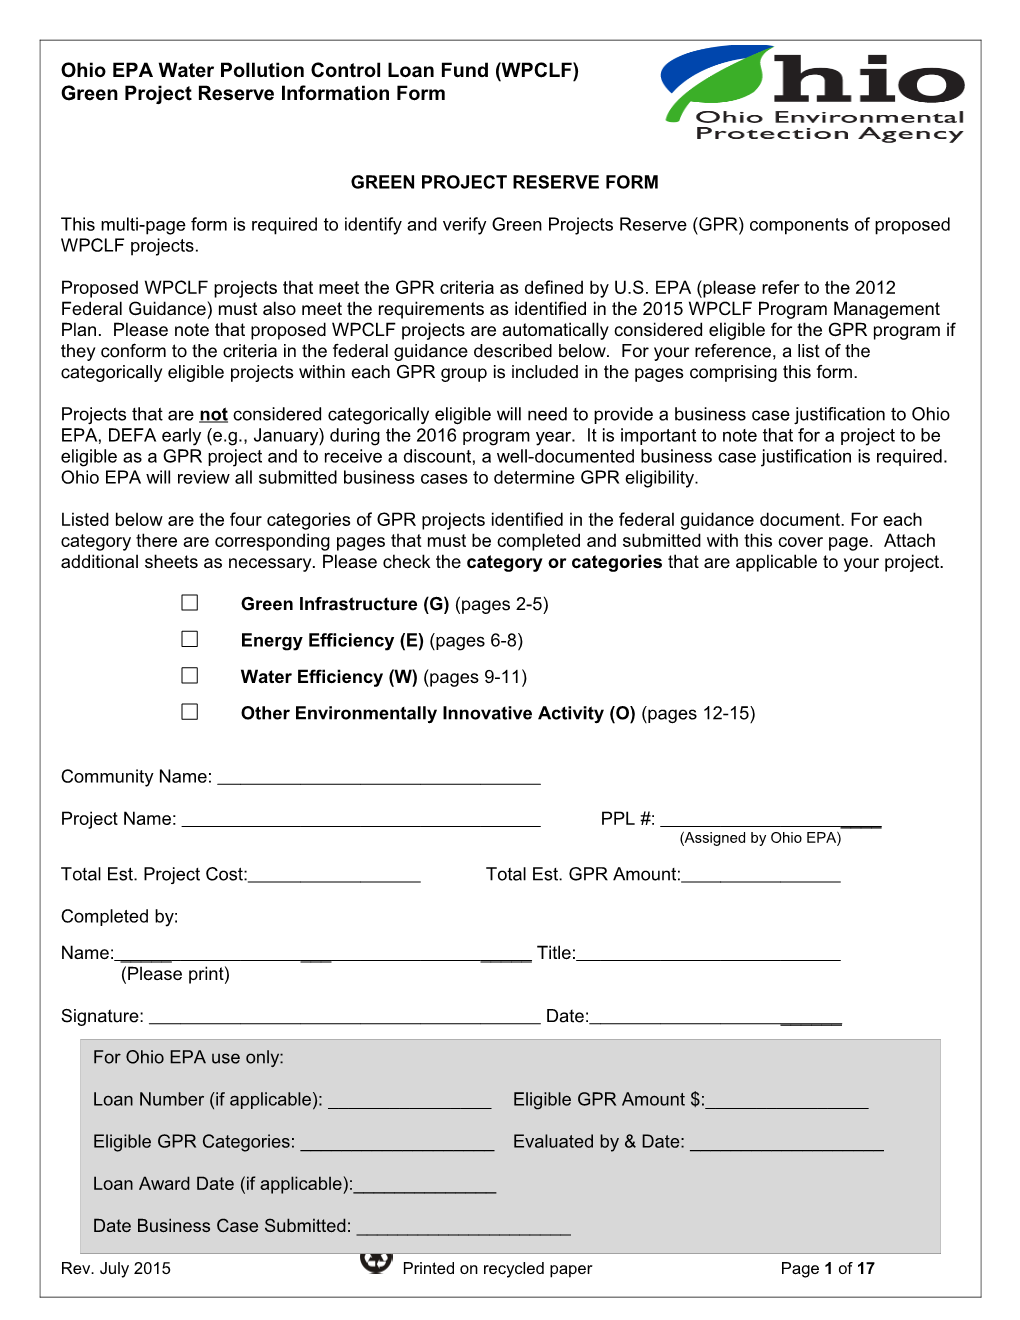 Green Project Reserve Information Form